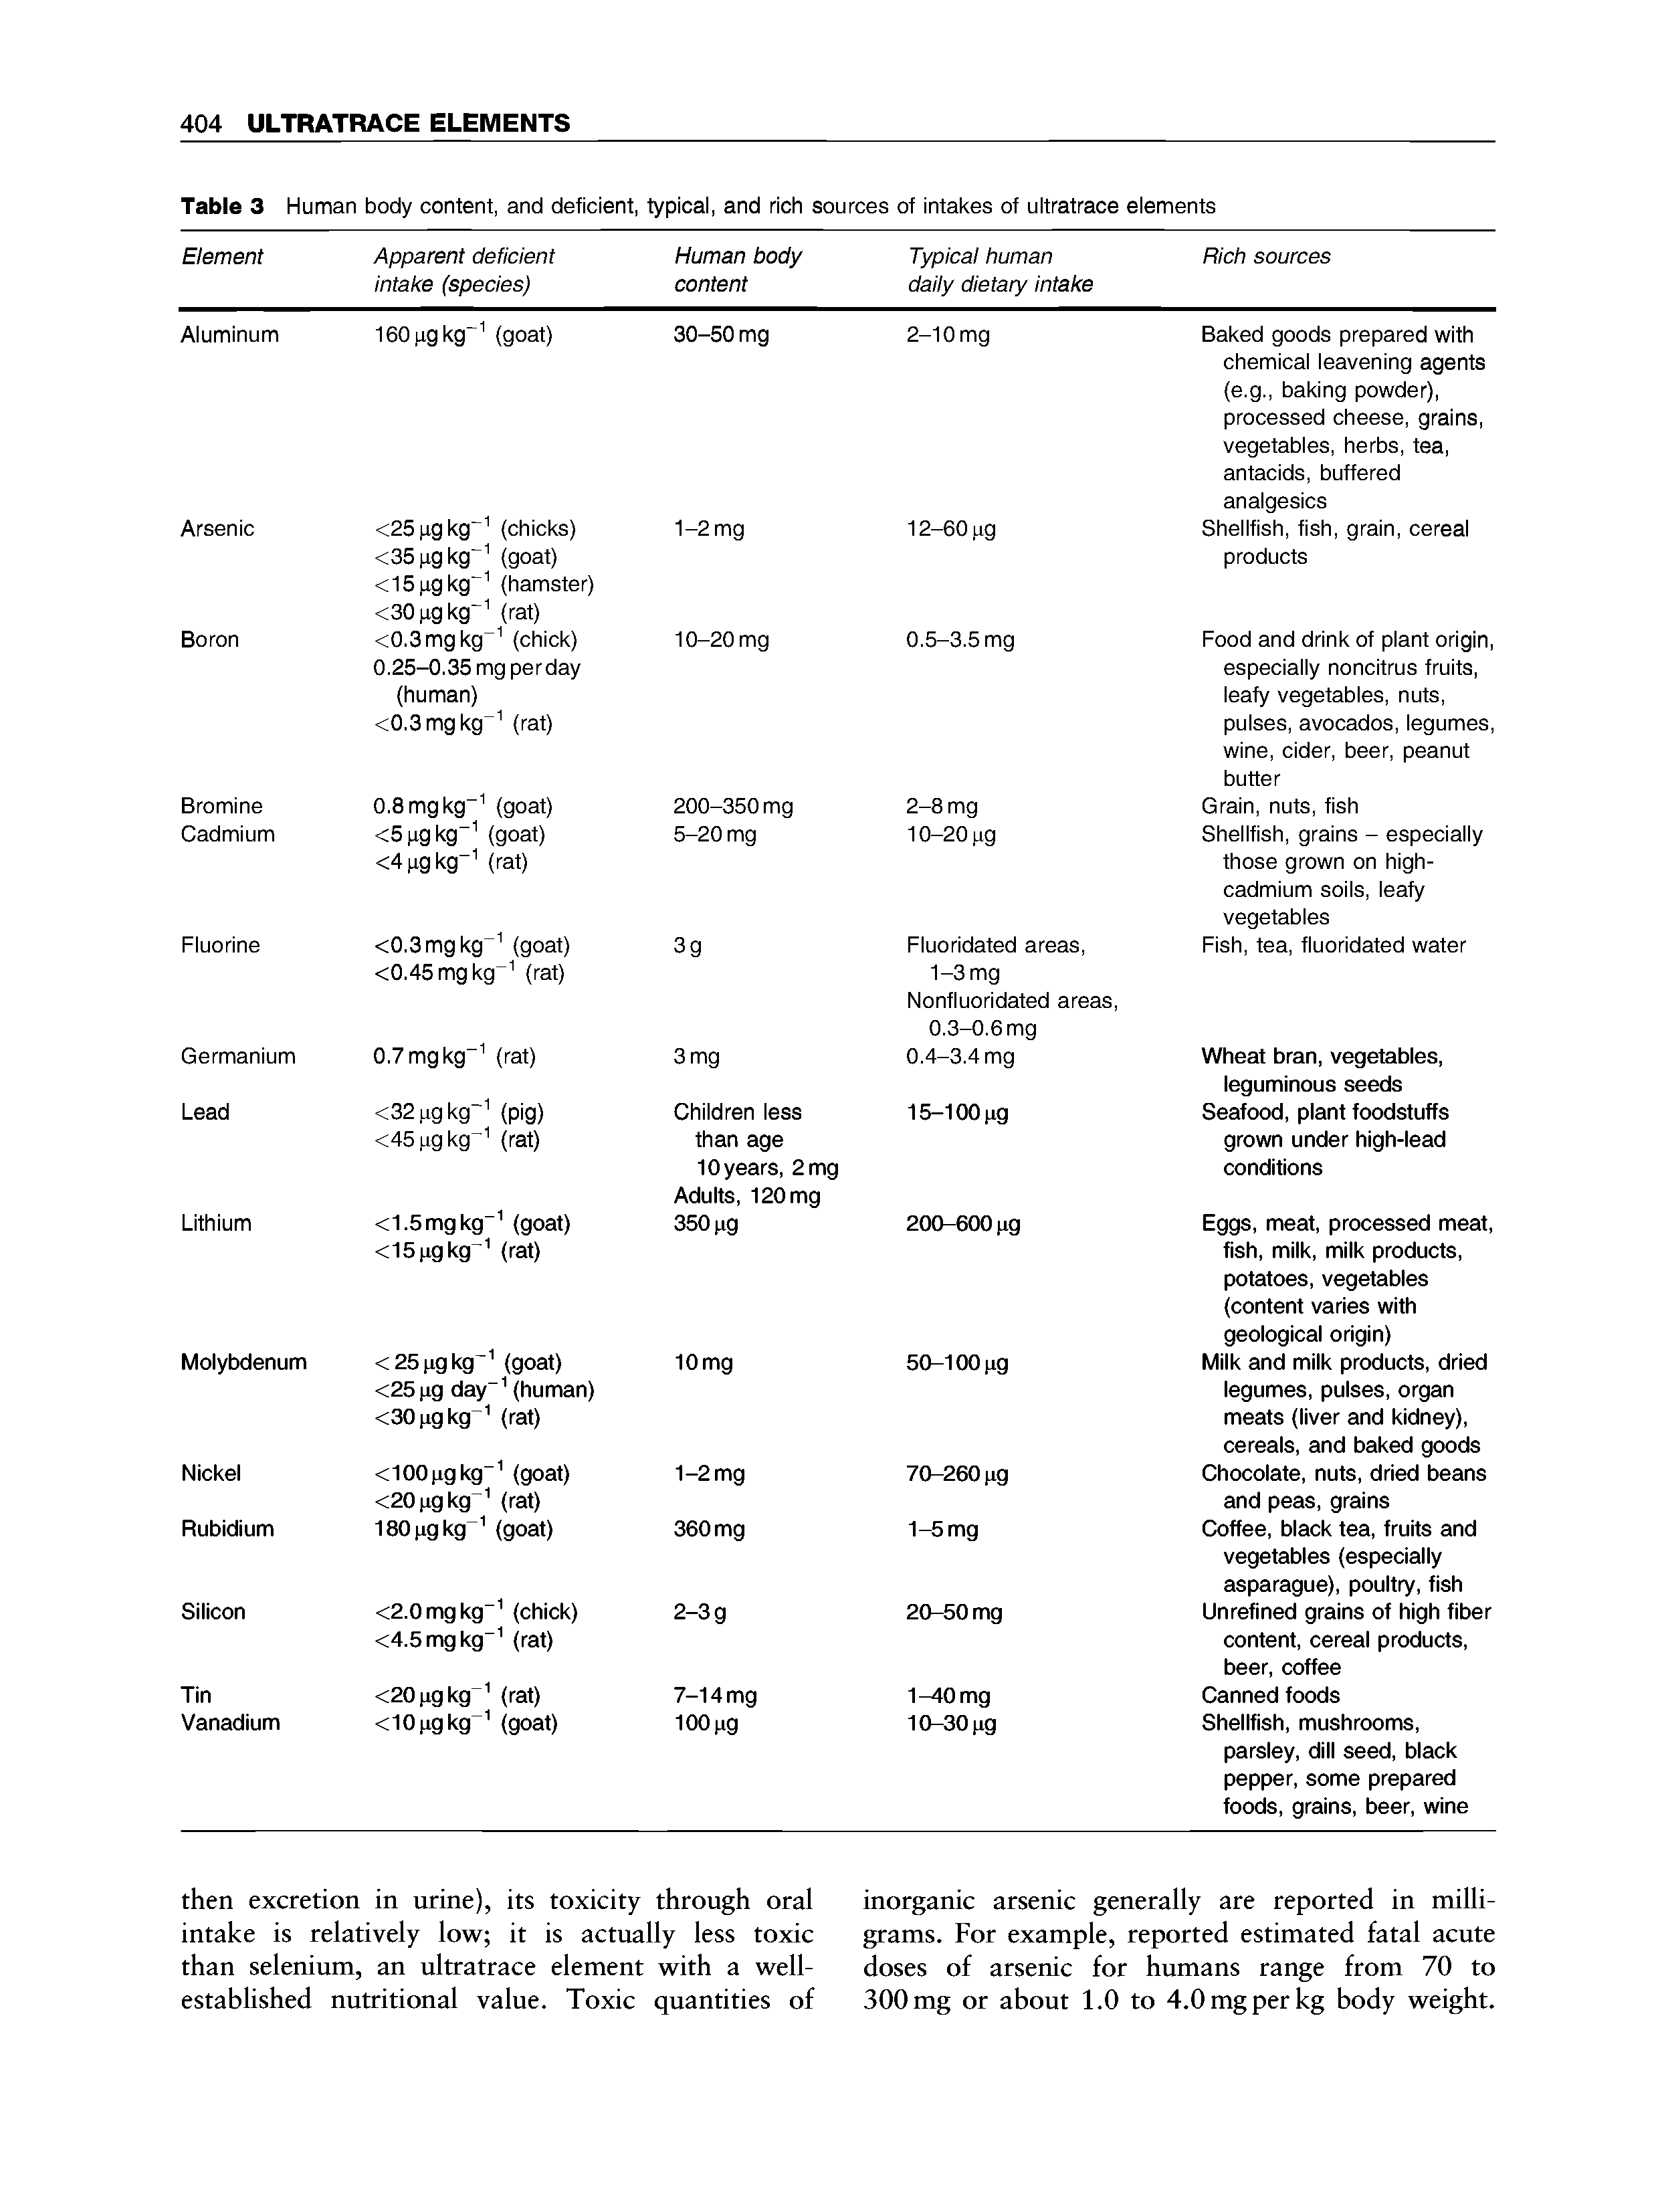 Table 3 Human body content, and deficient, typical, and rich sources of intakes of ultratrace elements ...